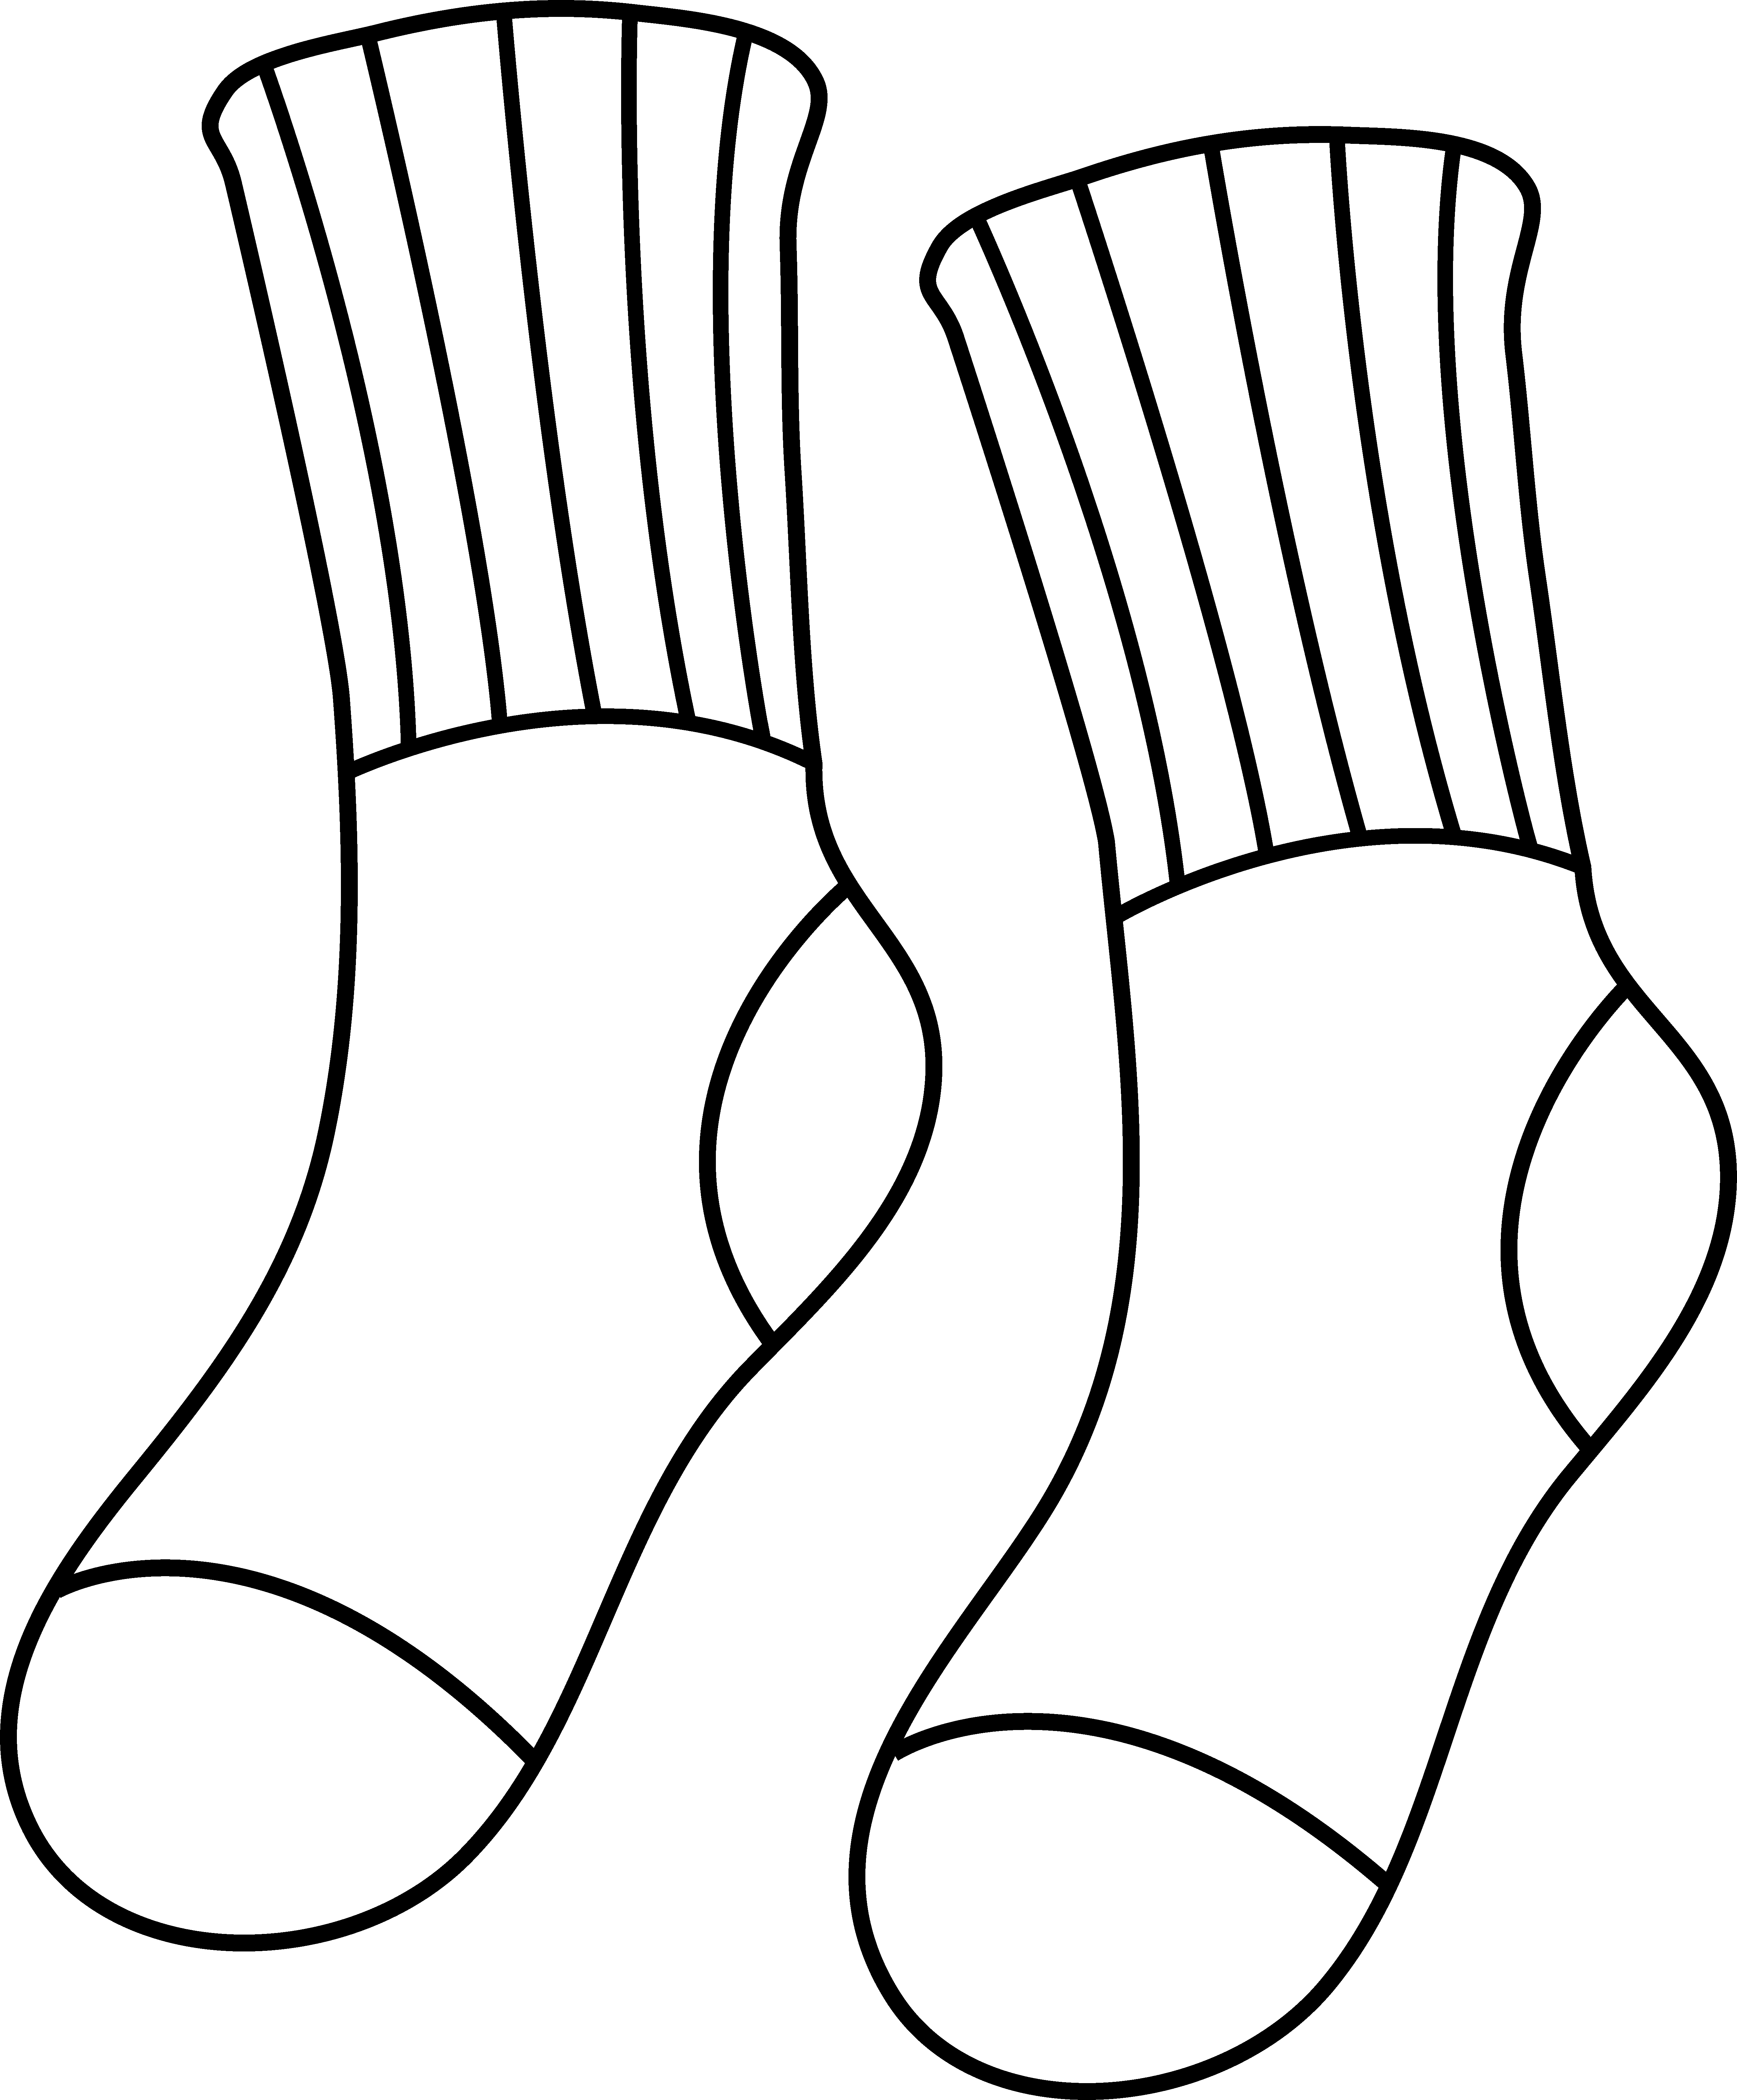 Socks Coloring Page Colorable socks outline | Coloring pages ...